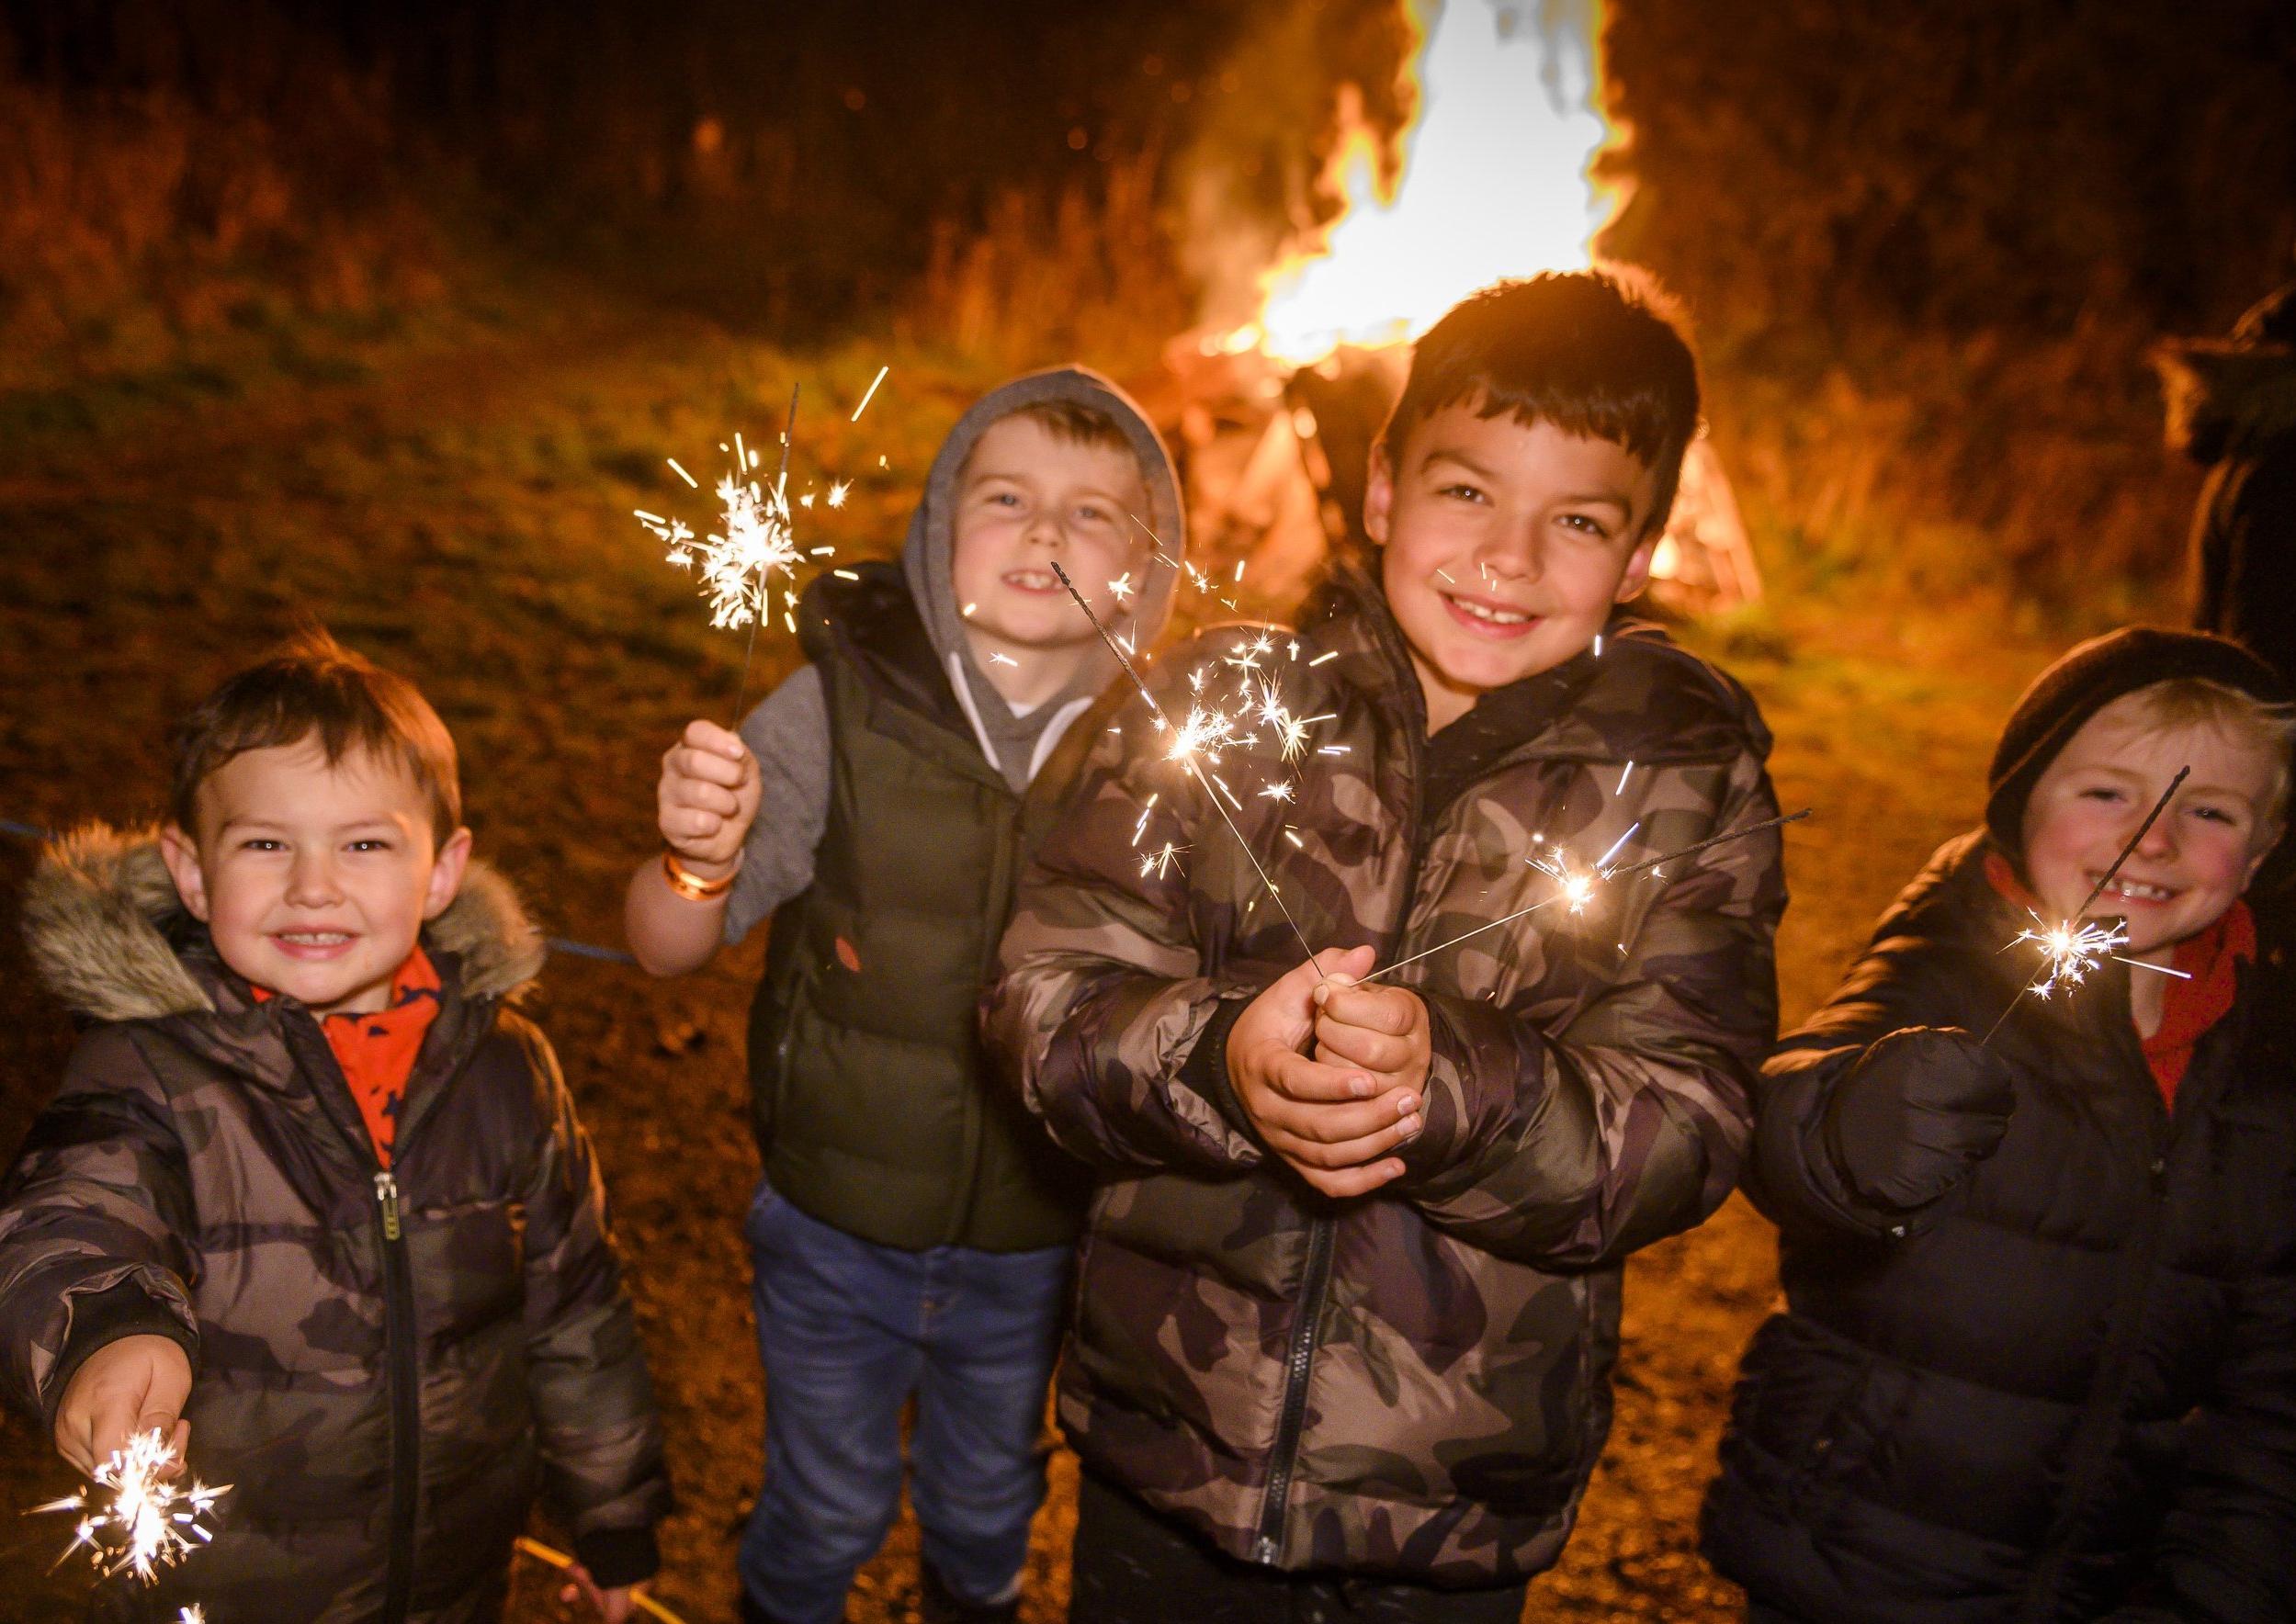 Lauder fireworks display 2019

Hamish Sutherland , 
Max and Mason Hogg,
Dexter Dickey
with sparklers.

Pic Phil Wilkinson 
info@philspix.com